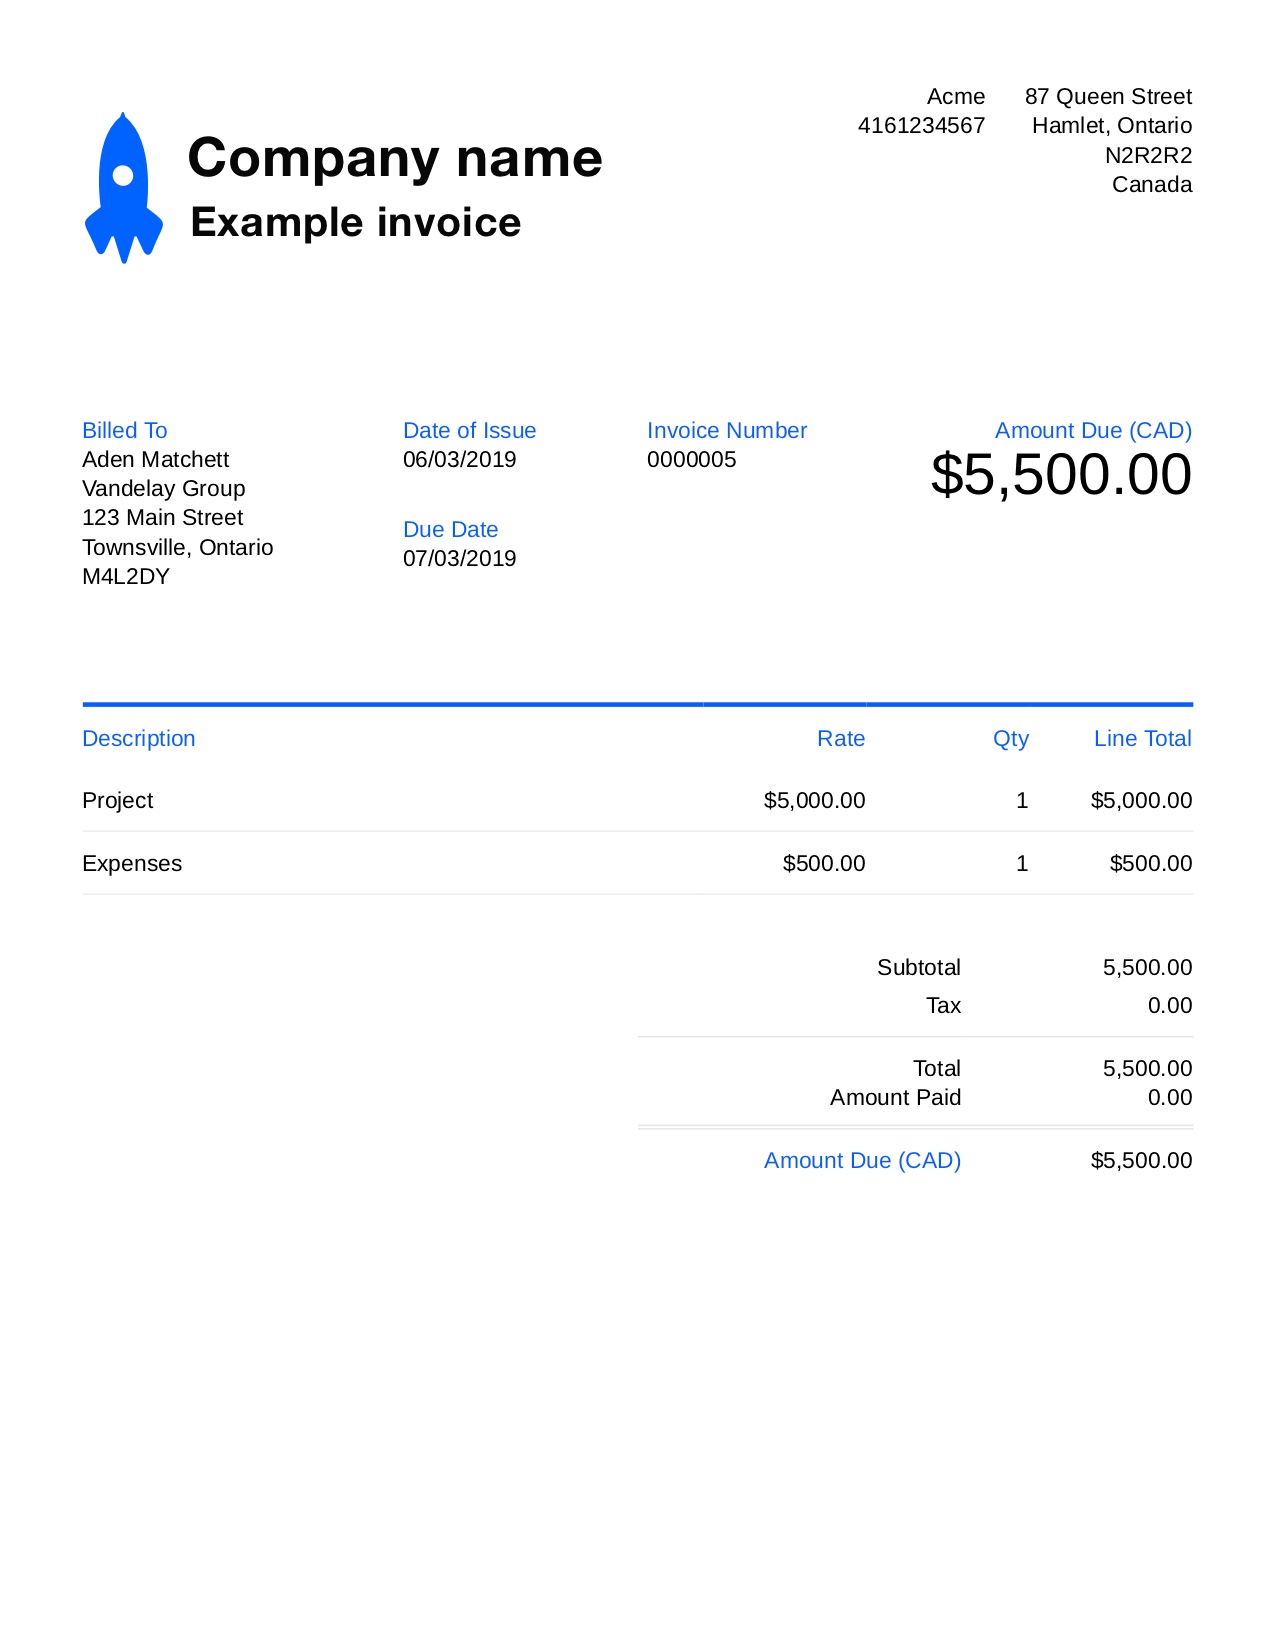 Standard Invoice Template from www.digital-invoice-template.com